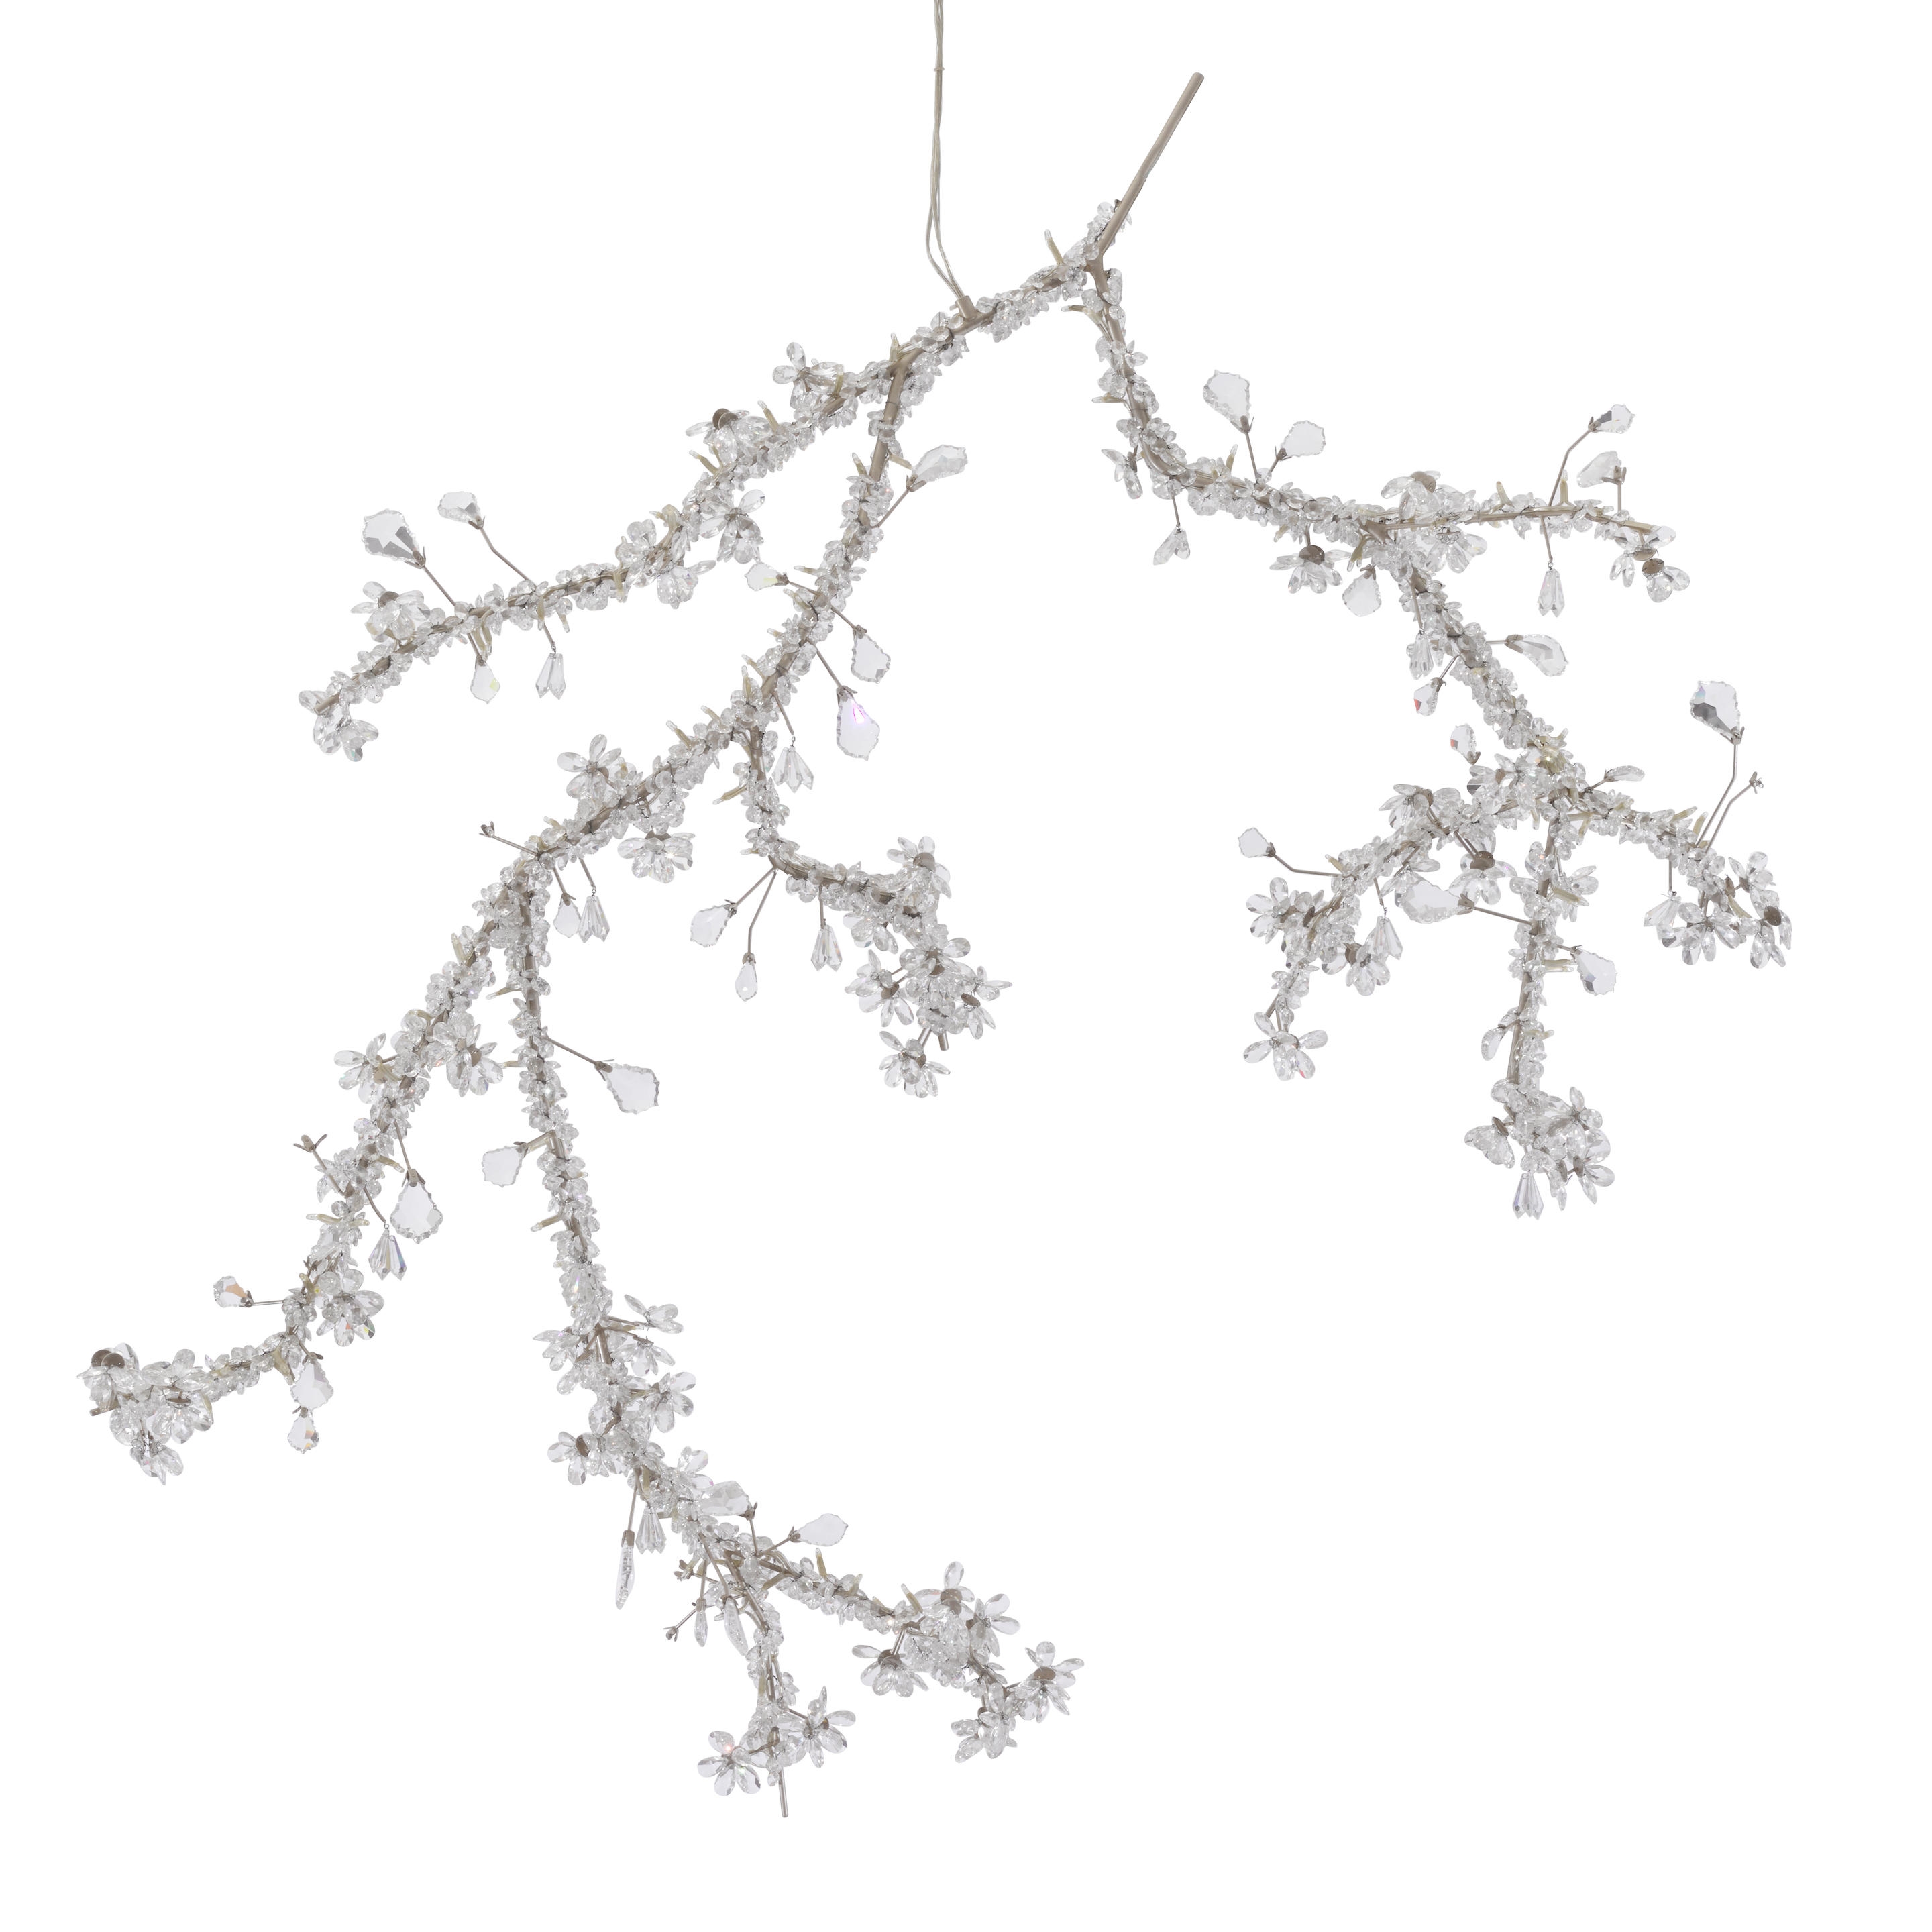 Blossom Chandelier by Tord Boontje, designed 2002